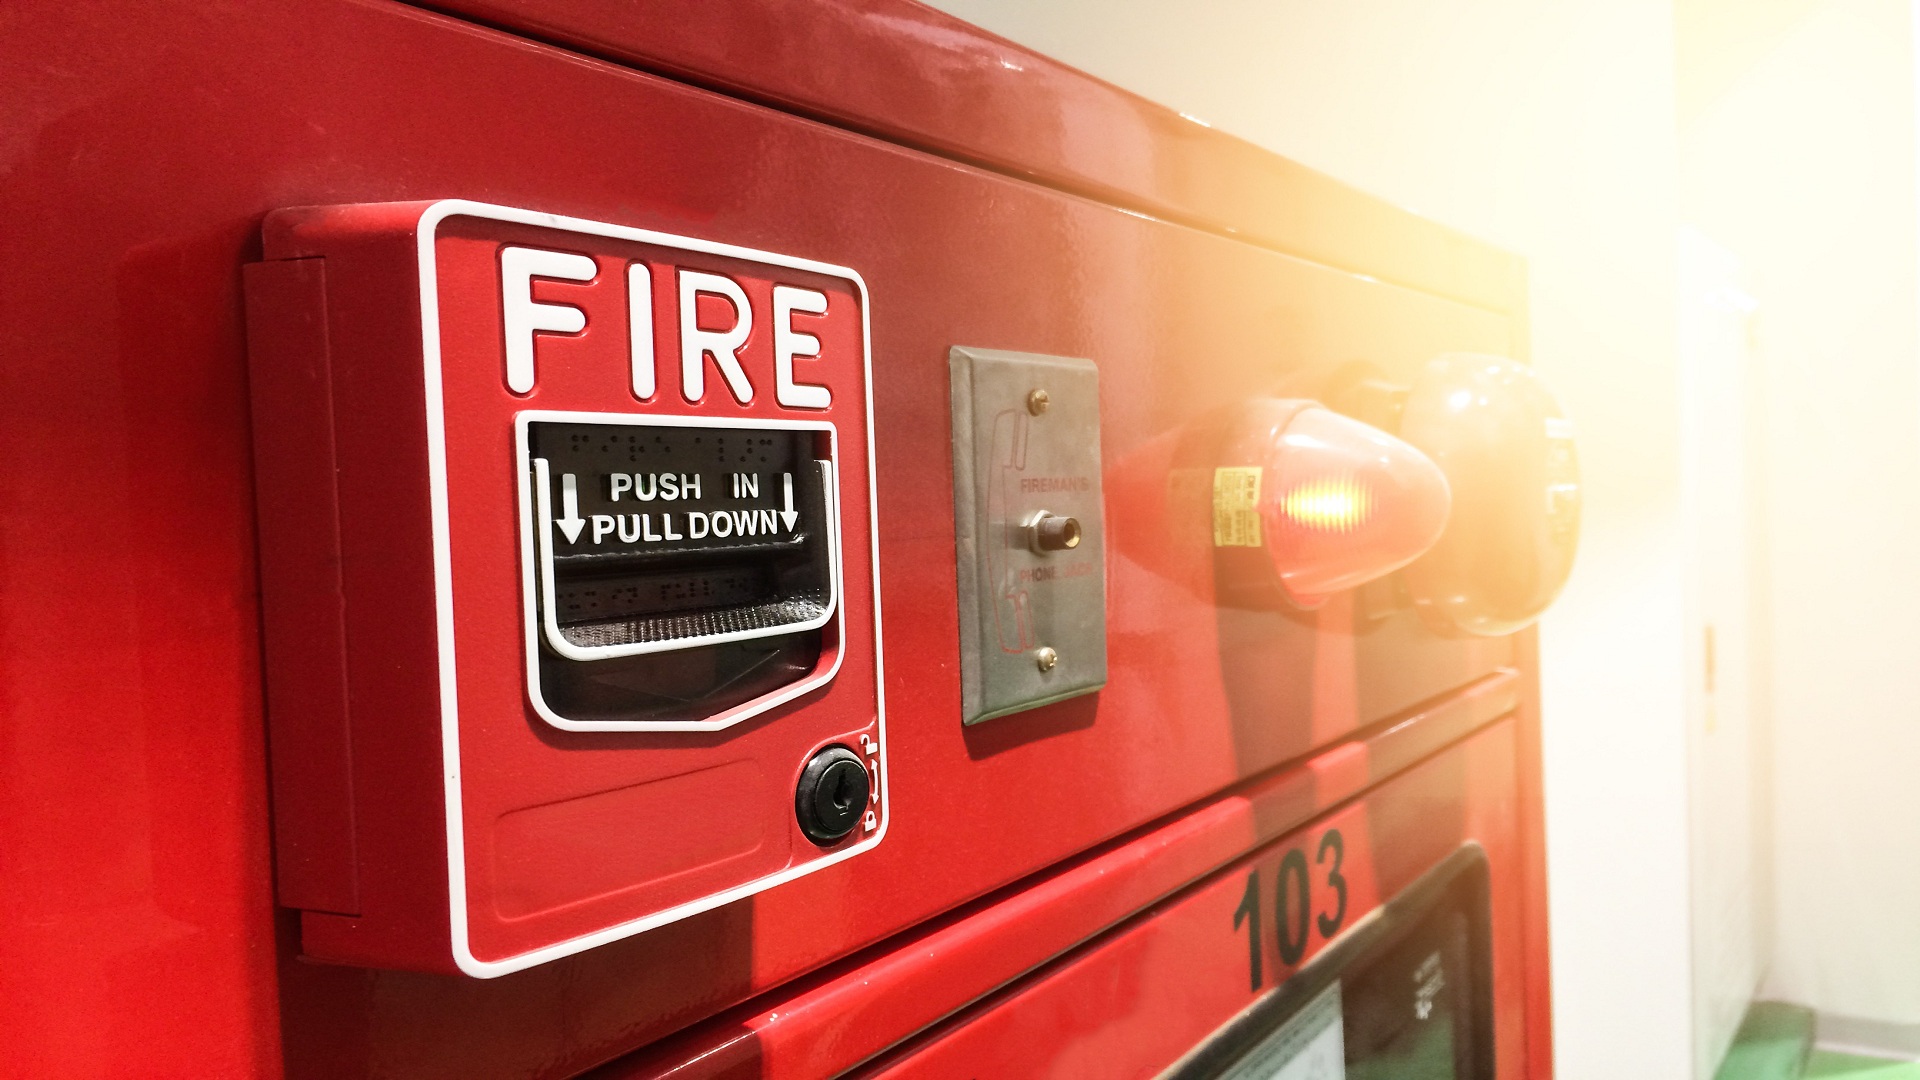 Fire Alarm System - Traditional Fire Alarm System , HD Wallpaper & Backgrounds